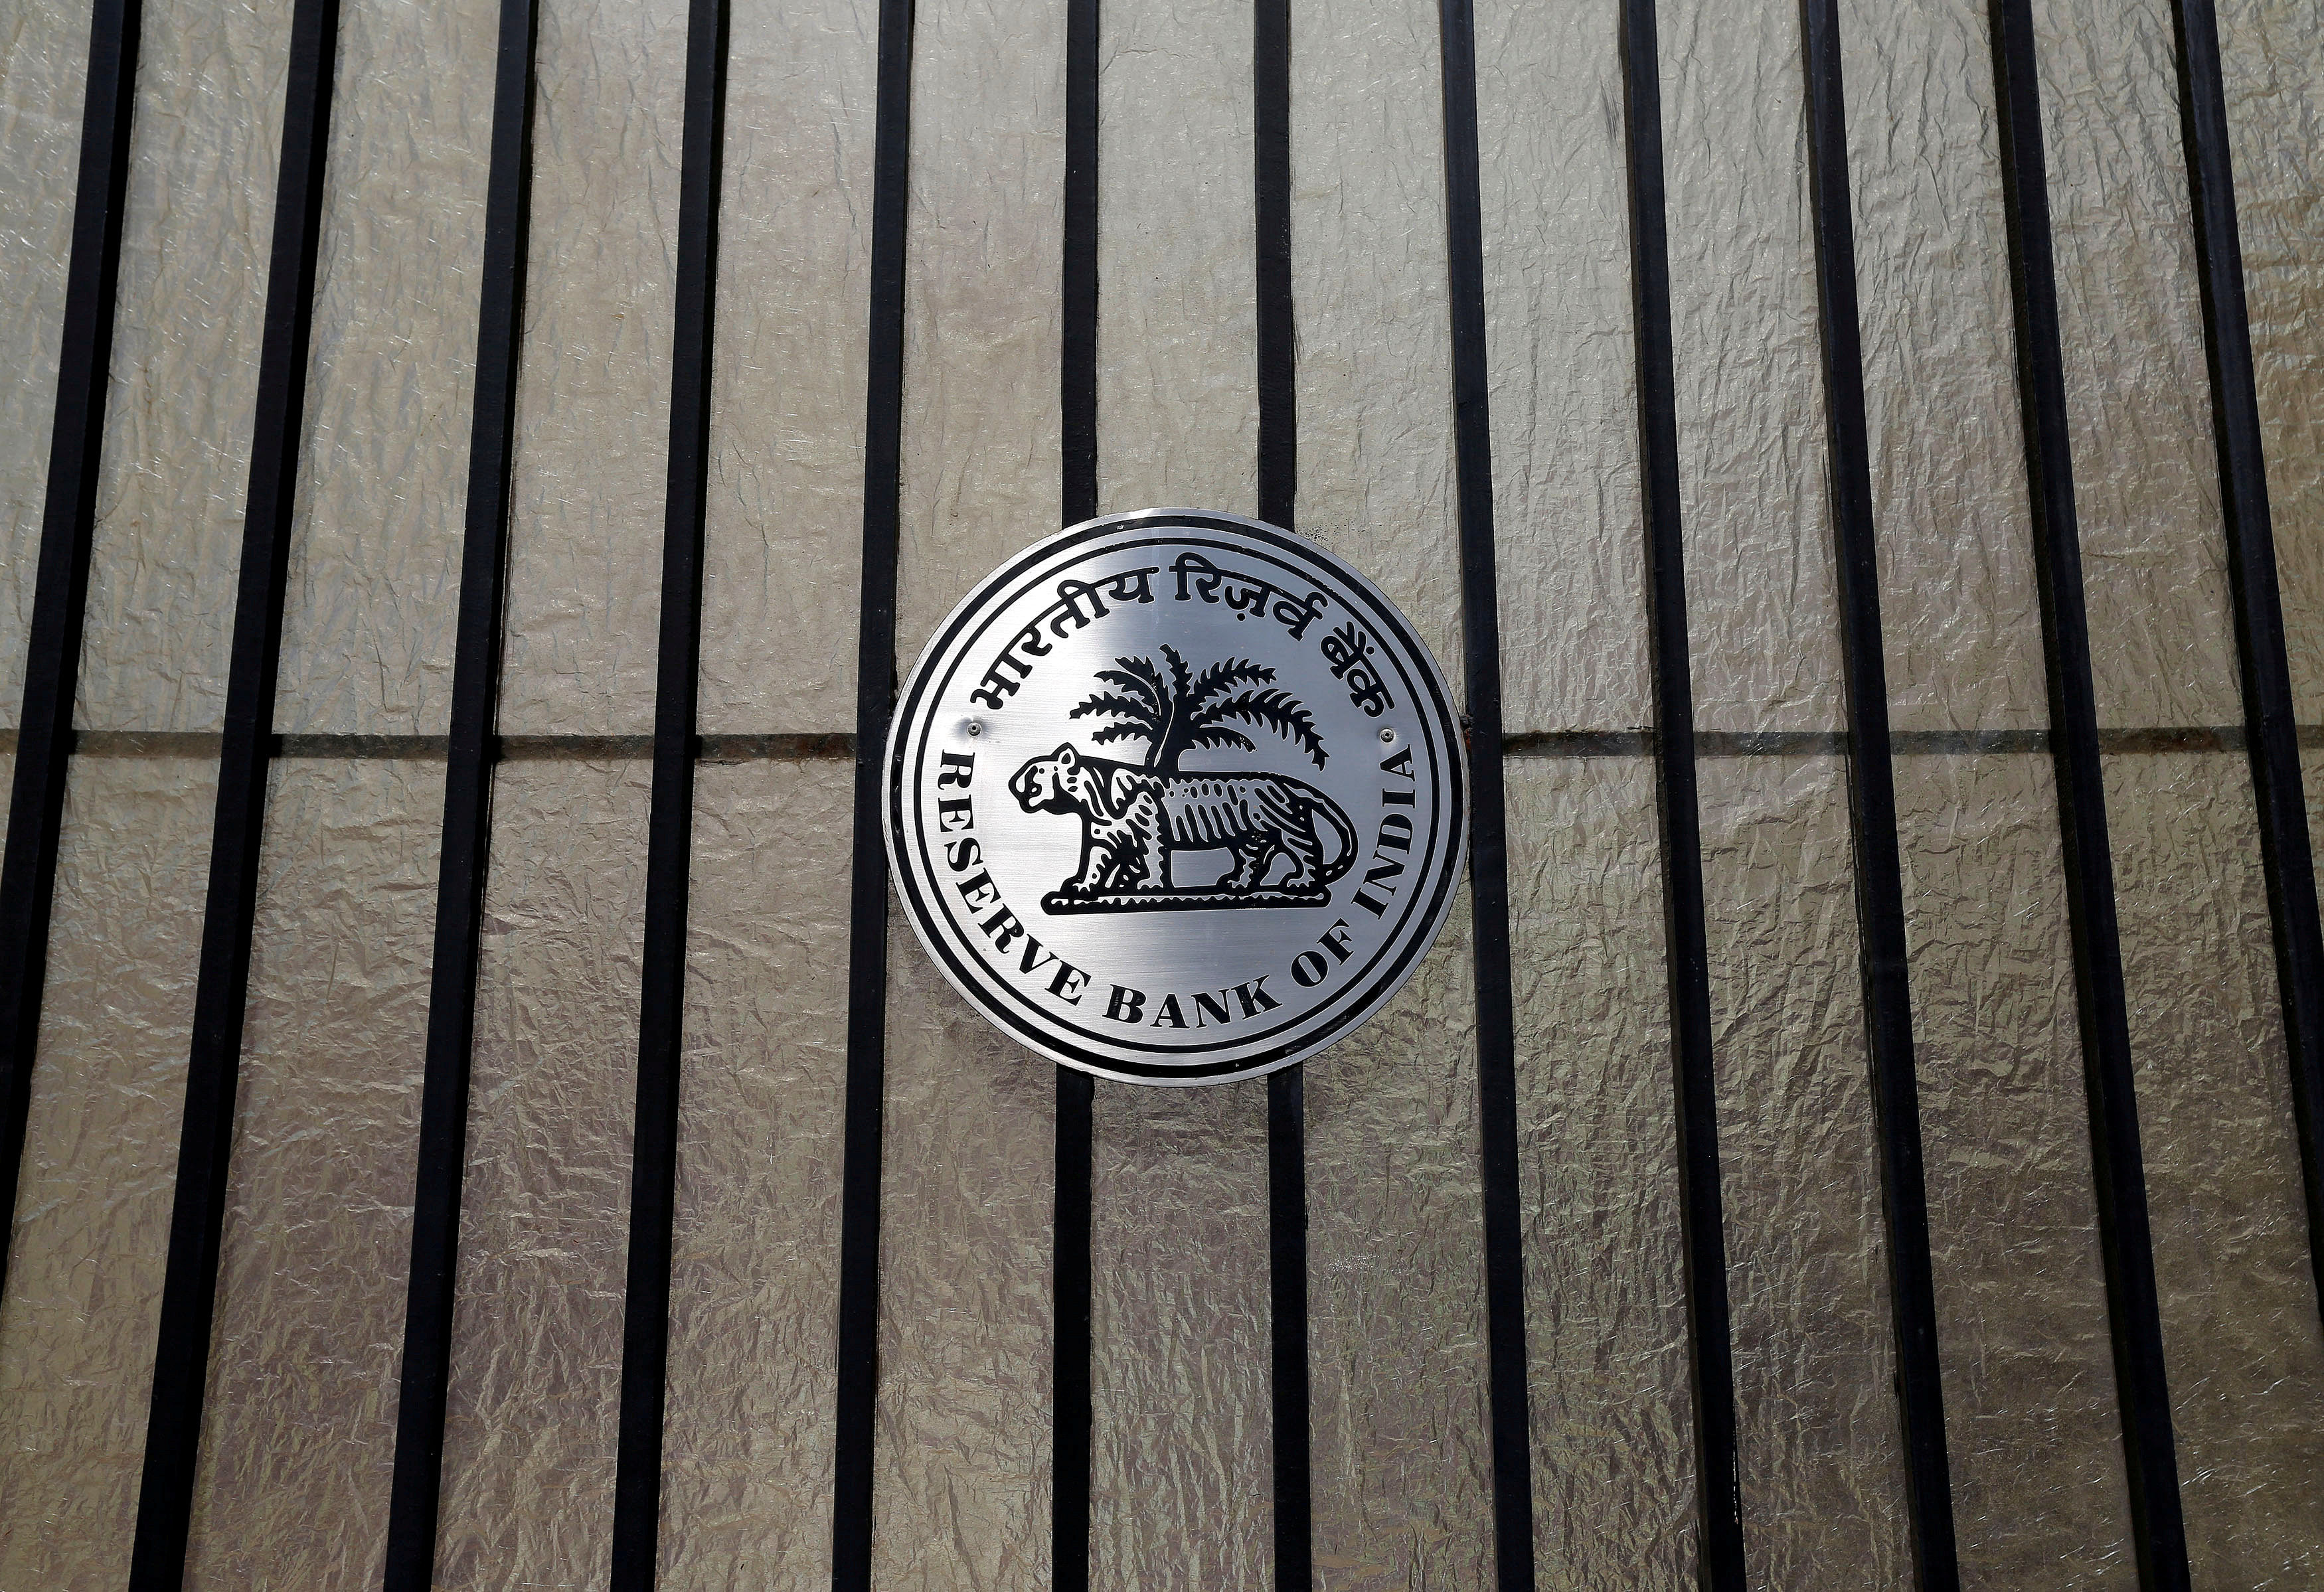 A Reserve Bank of India (RBI) logo is seen at the entrance gate of its headquarters in Mumbai. (Reuters Photo)